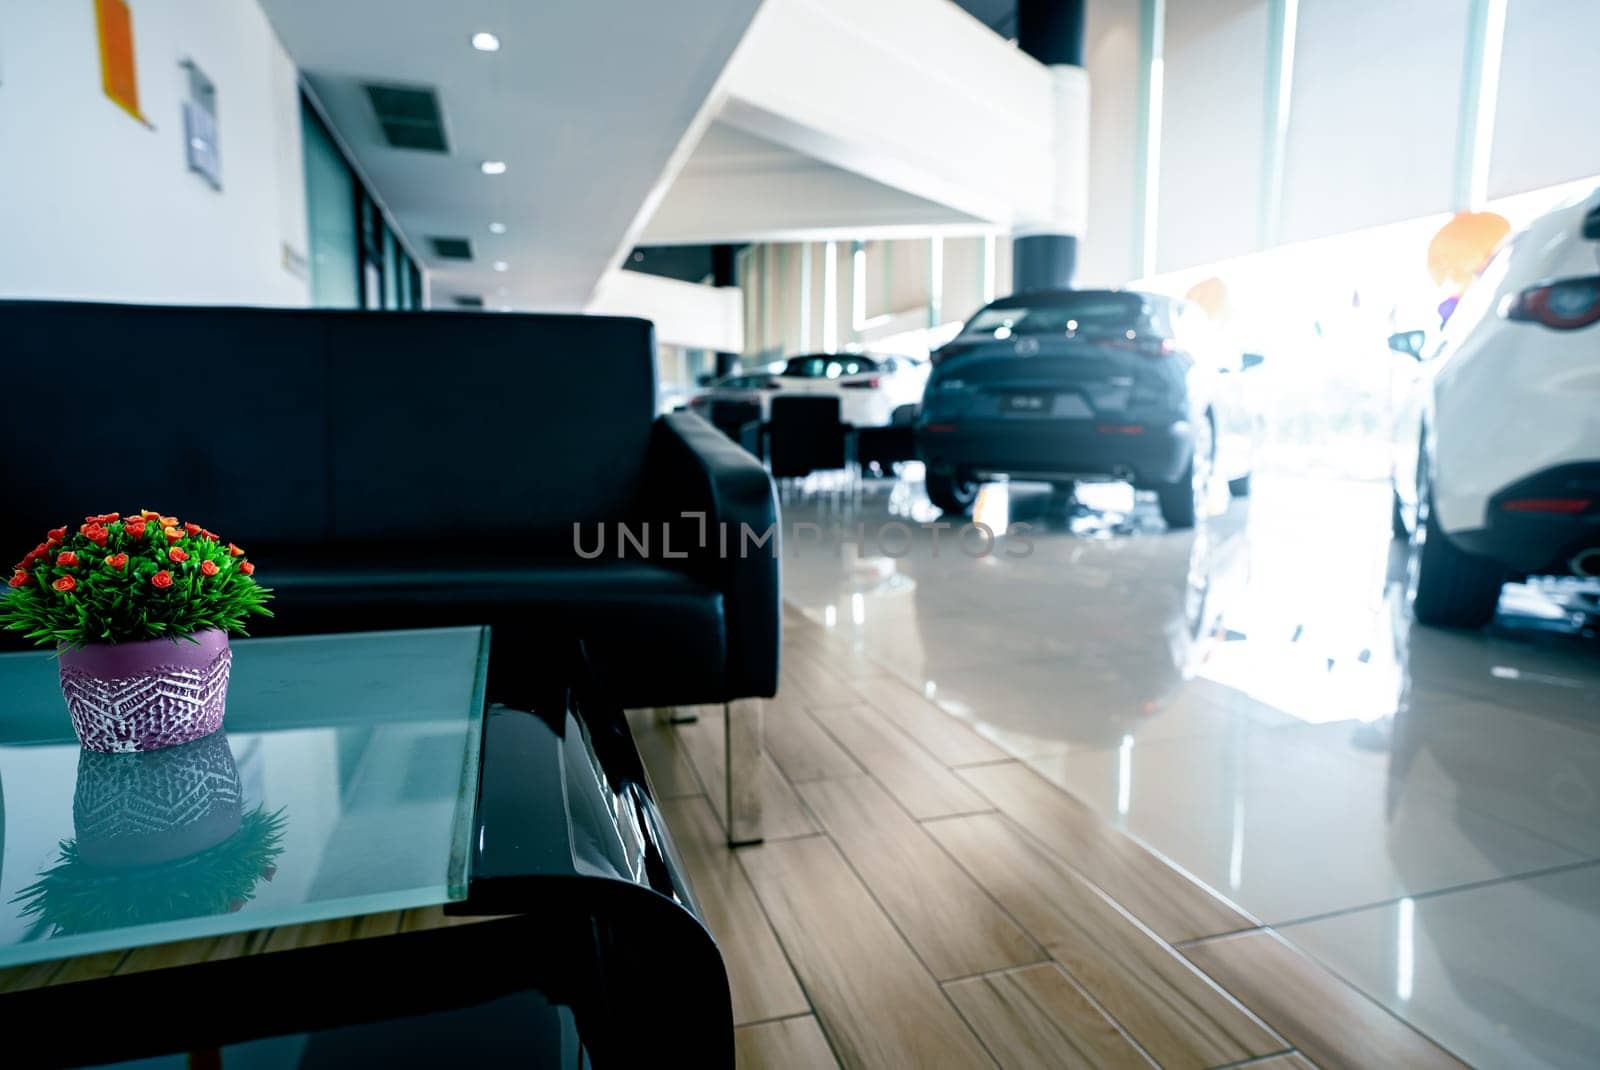 Rear view of new car parked in luxury showroom. Closeup new car parked in modern showroom. Automobile leasing and insurance background. Automotive industry. Auto leasing business. Electric vehicle.